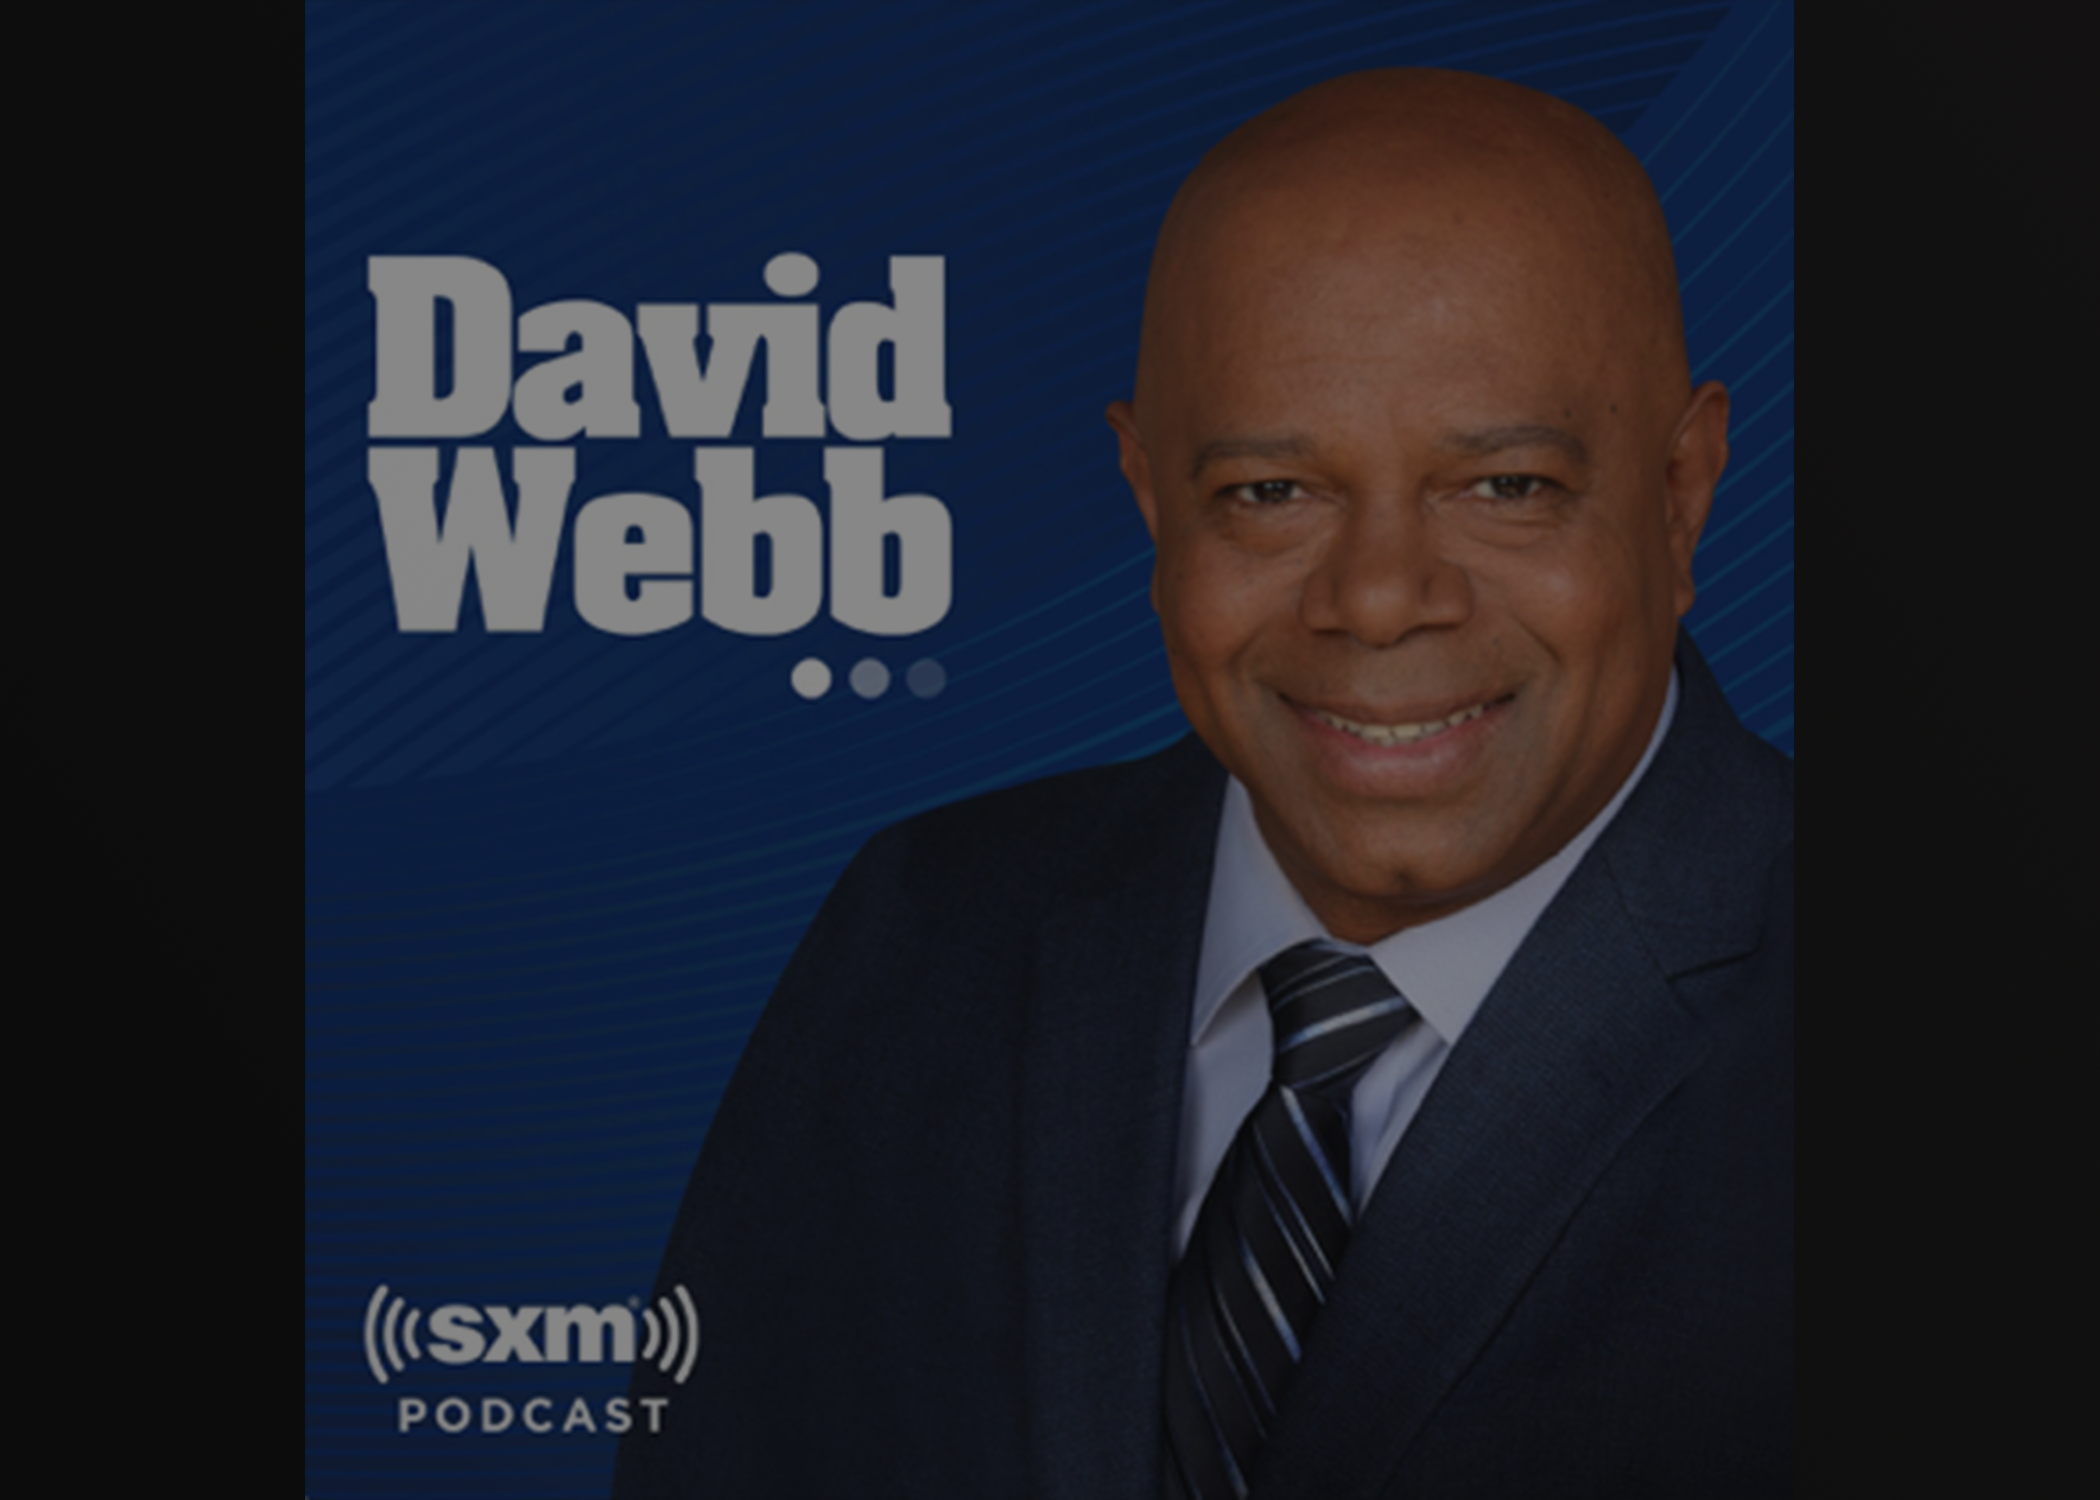 John Schnatter on The David Webb Show with Kerry Picket 2/19/21